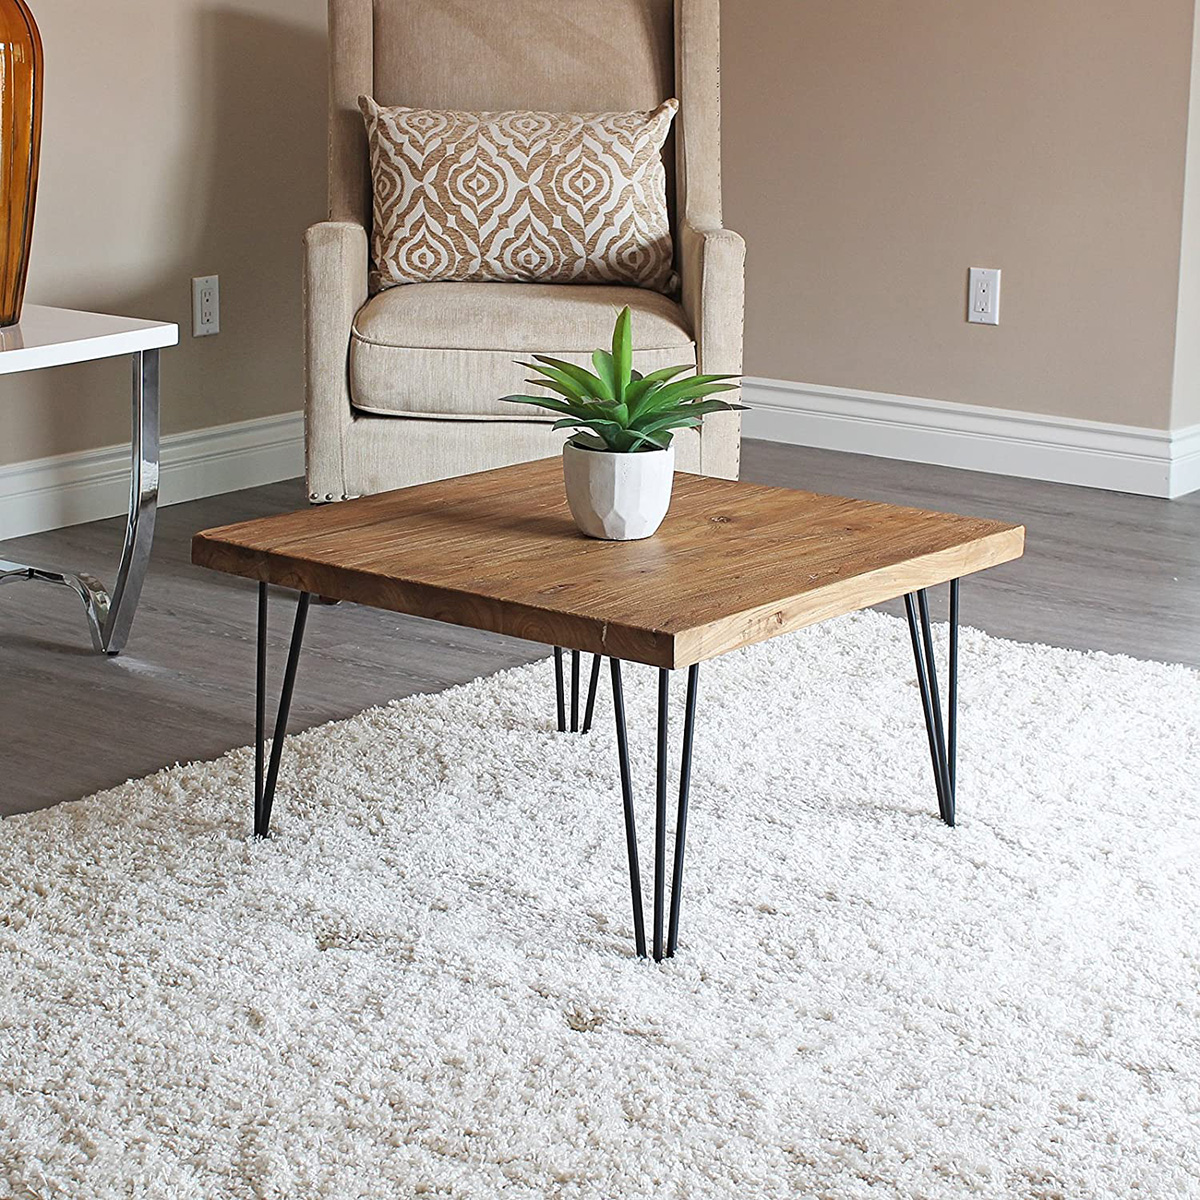 51 Wood Coffee Tables To Create A Cozy And Inviting Atmosphere